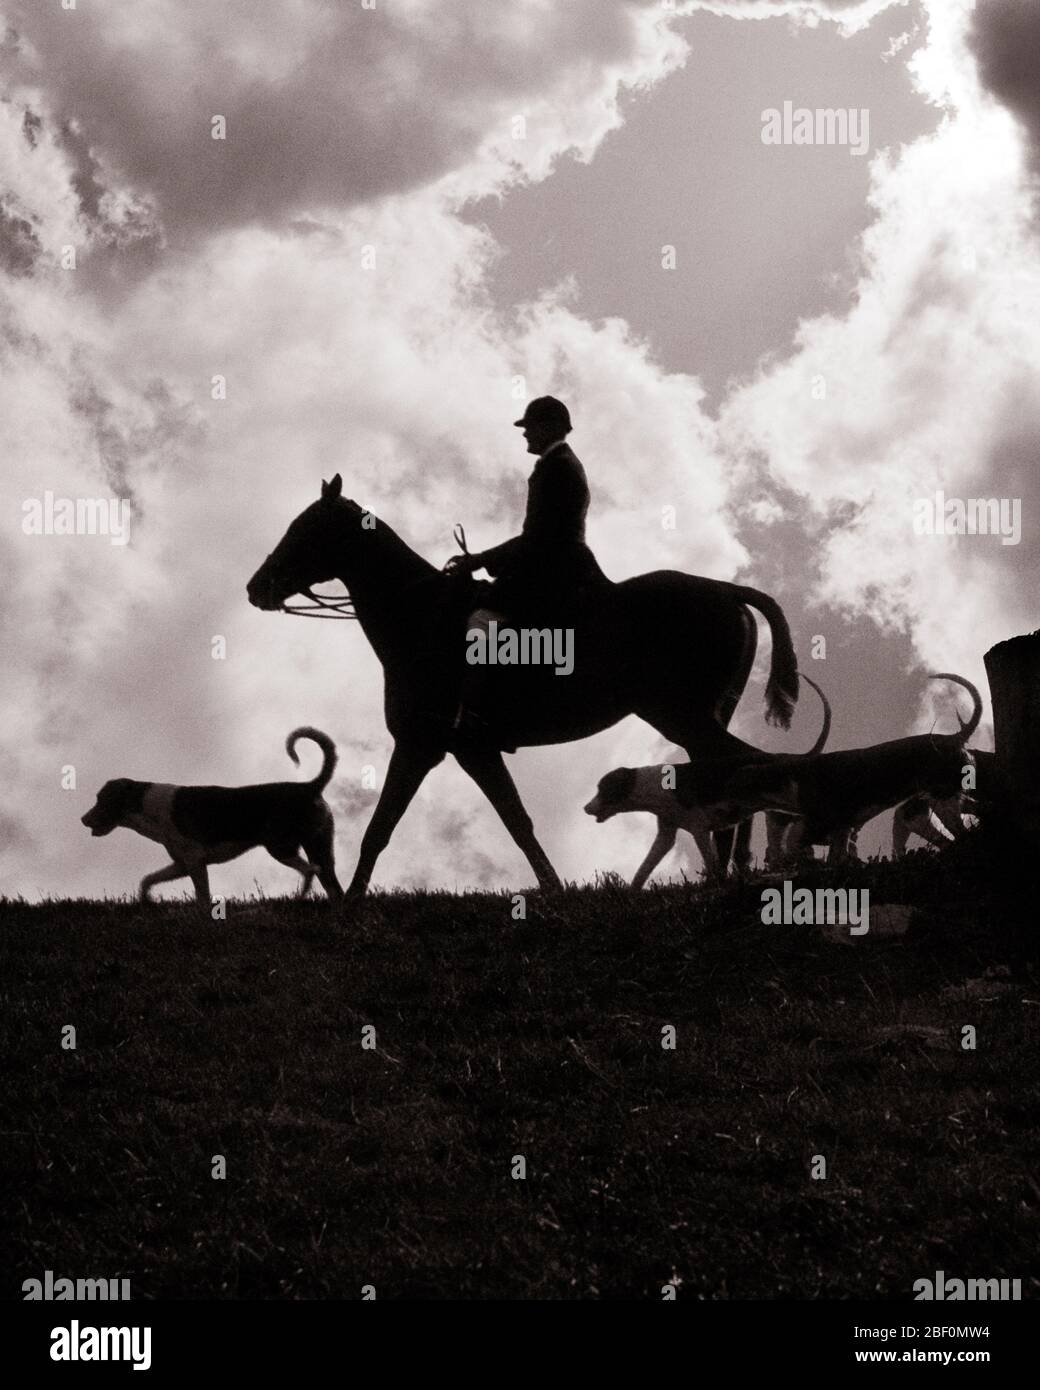 1930s SILHOUETTE OF MASTER OF HOUNDS ON HORSEBACK WITH DOGS FOXHOUNDS LEADING THE FOXHUNT - f739 HAR001 HARS MALES RISK FOX ATHLETIC ENTERTAINMENT SILHOUETTES TRANSPORTATION LEADING B&W OUTLINE CLOUDS SKILL ACTIVITY HORSEBACK OCCUPATION SKILLS MAMMALS ADVENTURE SILHOUETTED CANINES DRAMATIC HOUNDS RECREATION MASTER OCCUPATIONS UPSCALE POOCH CRUEL CONCEPTUAL AFFLUENT CONTROVERSIAL STYLISH FOX HUNT FOX HUNTING FOXHOUNDS TRAINED CANINE CHASING MAMMAL RED FOX WELL-TO-DO BLACK AND WHITE HAR001 KILLING OLD FASHIONED TRACKING Stock Photo